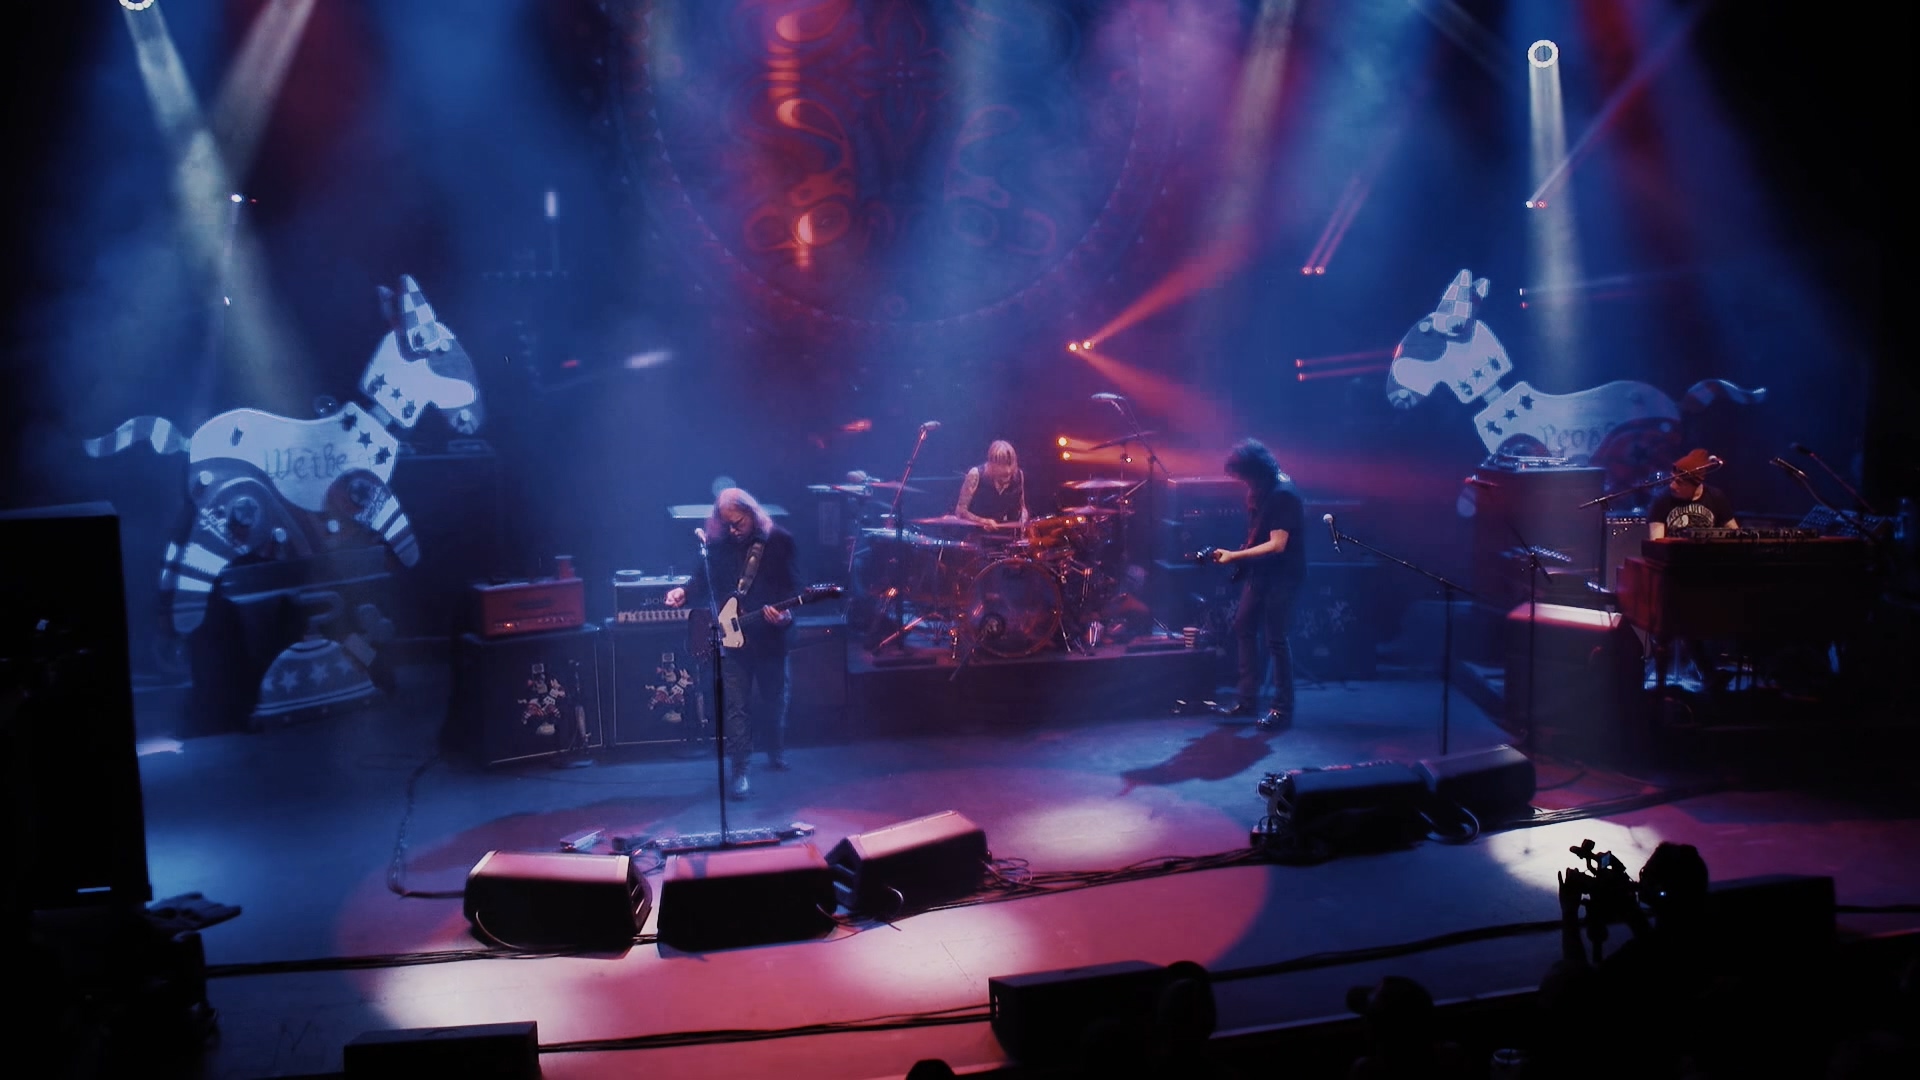 Gov't Mule - Bring On The Music Live At The Capitol Theatre 2018 Bluray 1080p AVC DTS-HD MA 5.1_20190727_125743.233.jpg